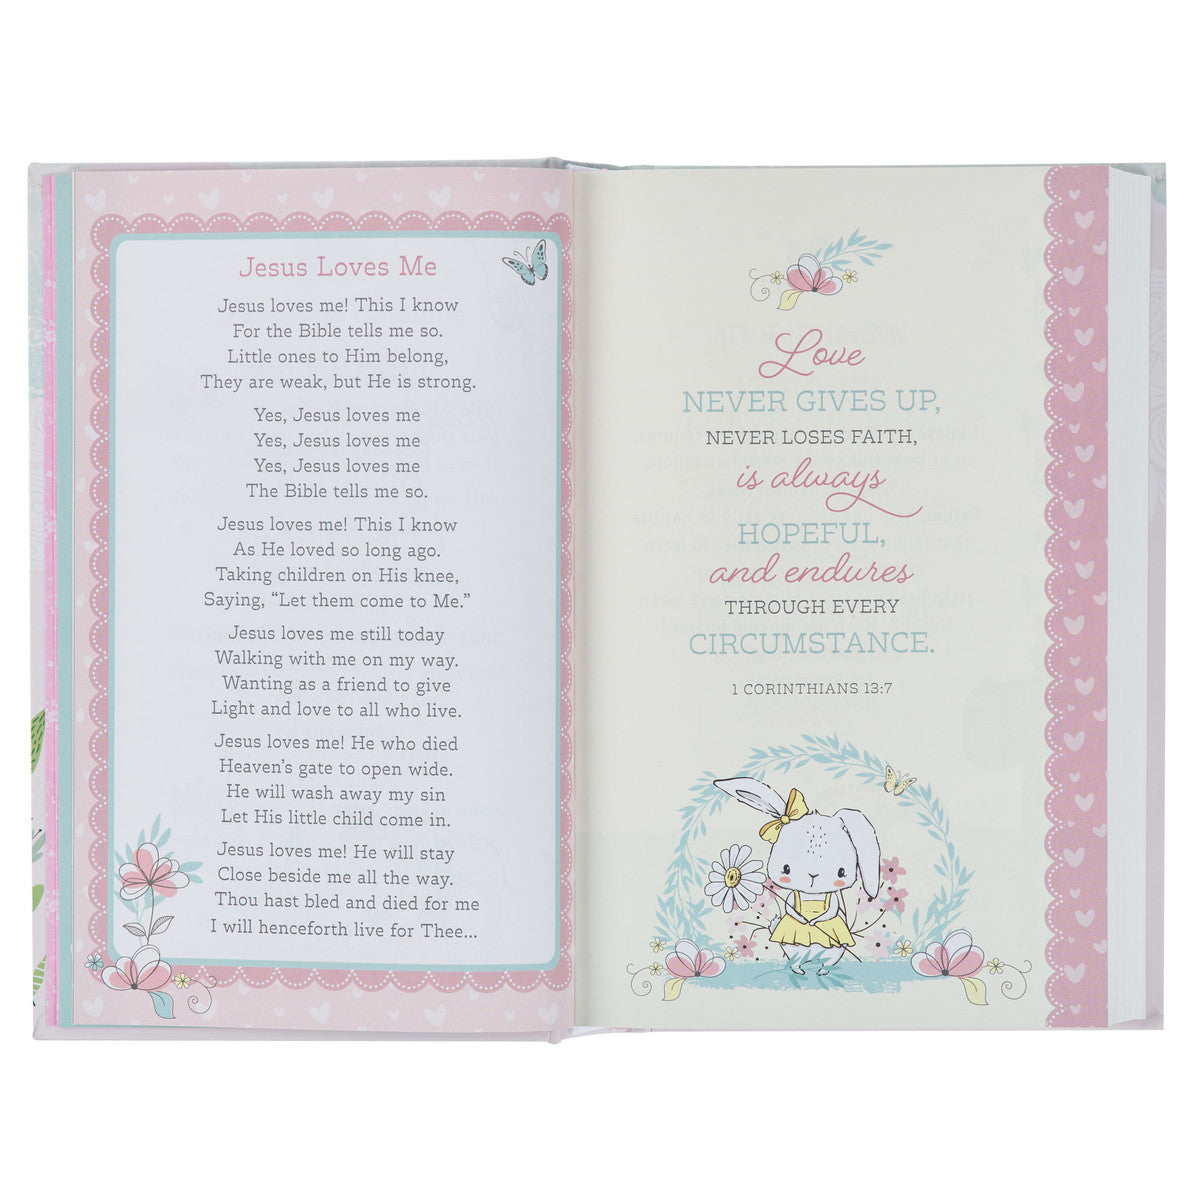 NLT Holy Bible for Baby Girls